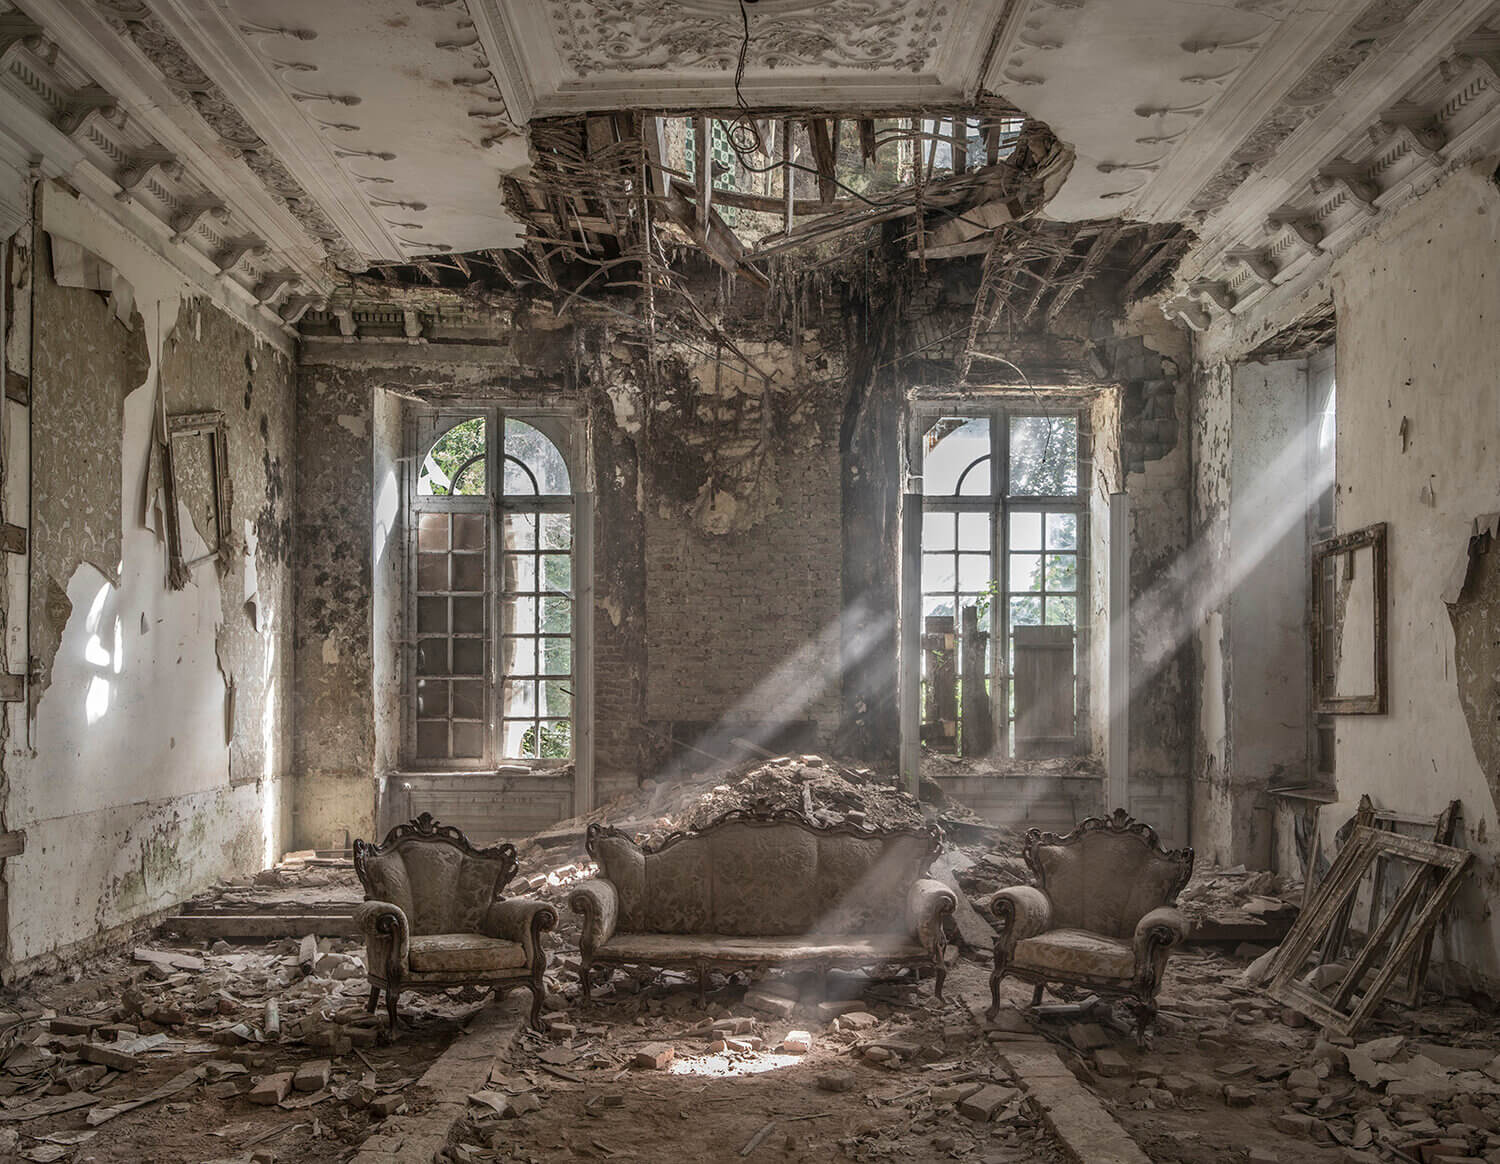 Matt Emmett's limited edition photograph of Ruined Chateau for Forgotten Heritage